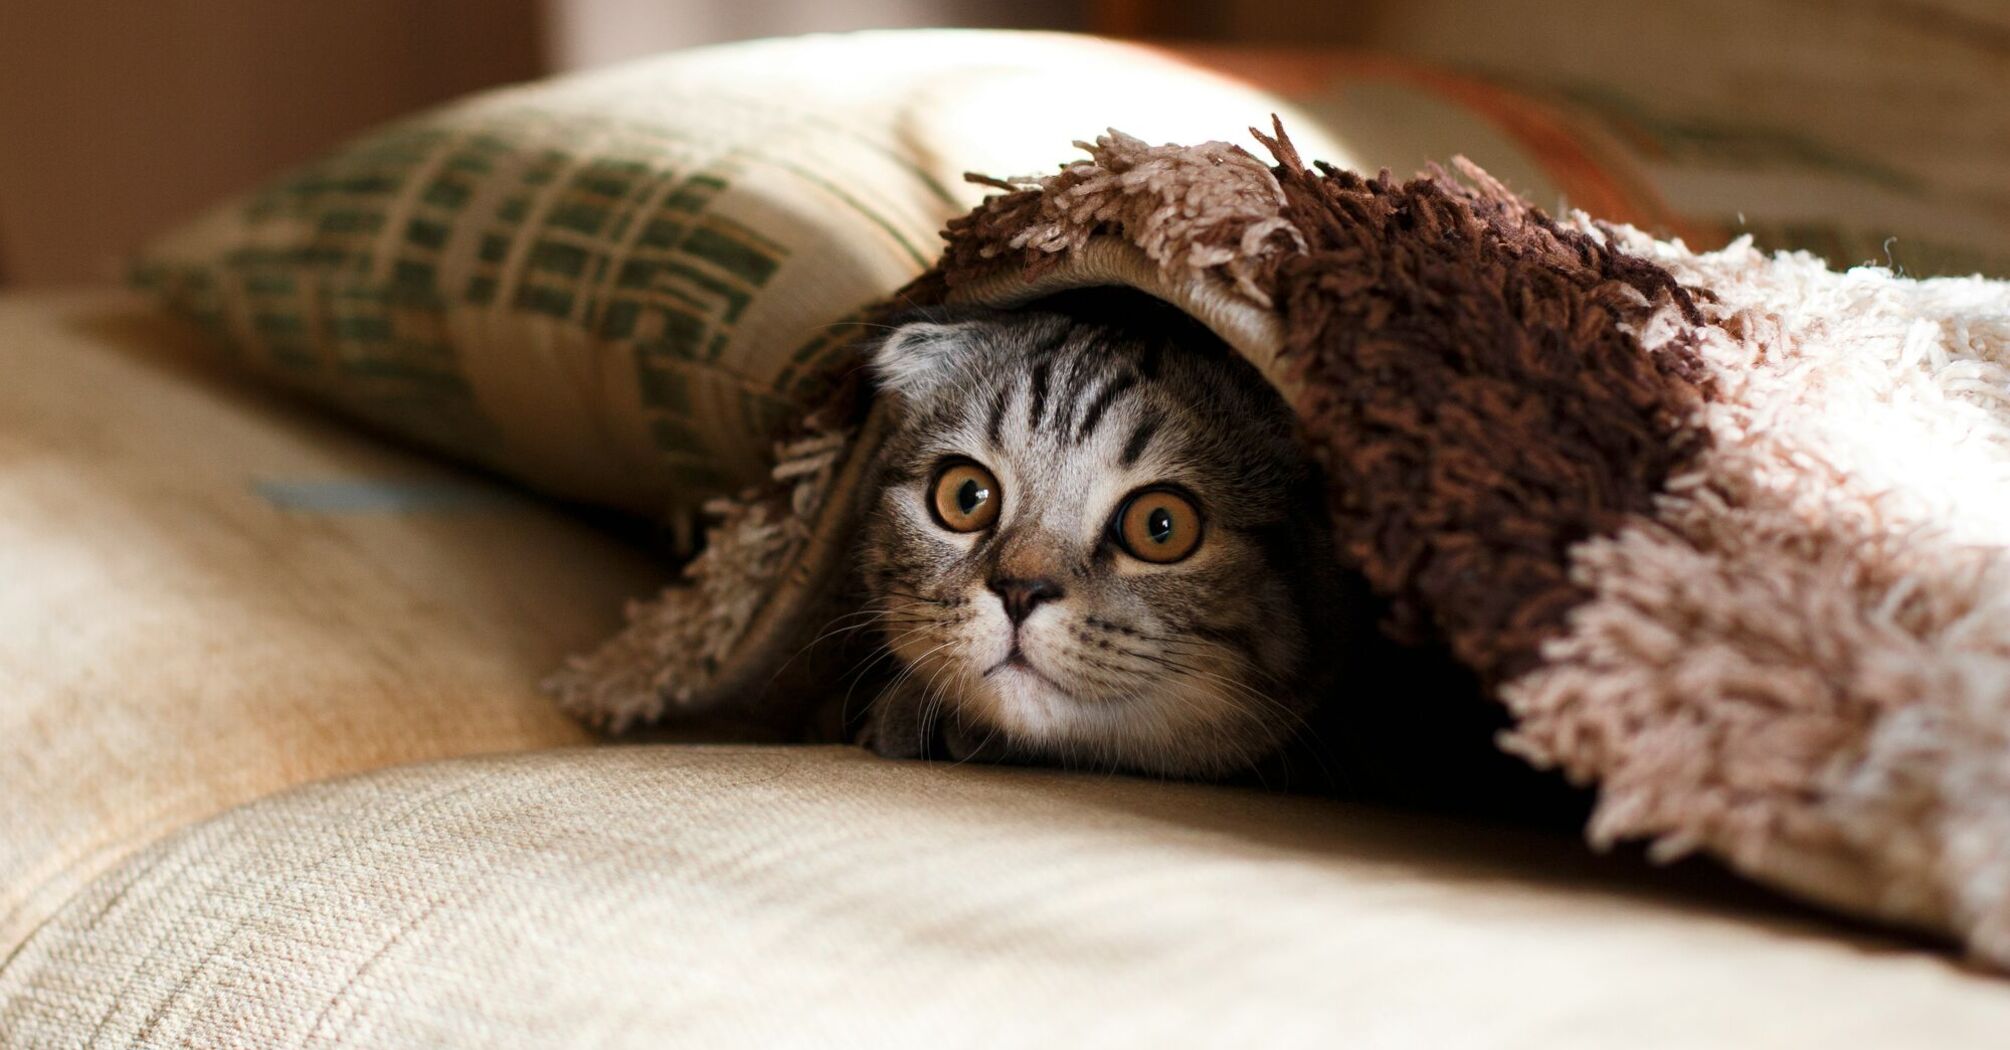 A curious cat peeking out from under a fluffy blanket on a sofa